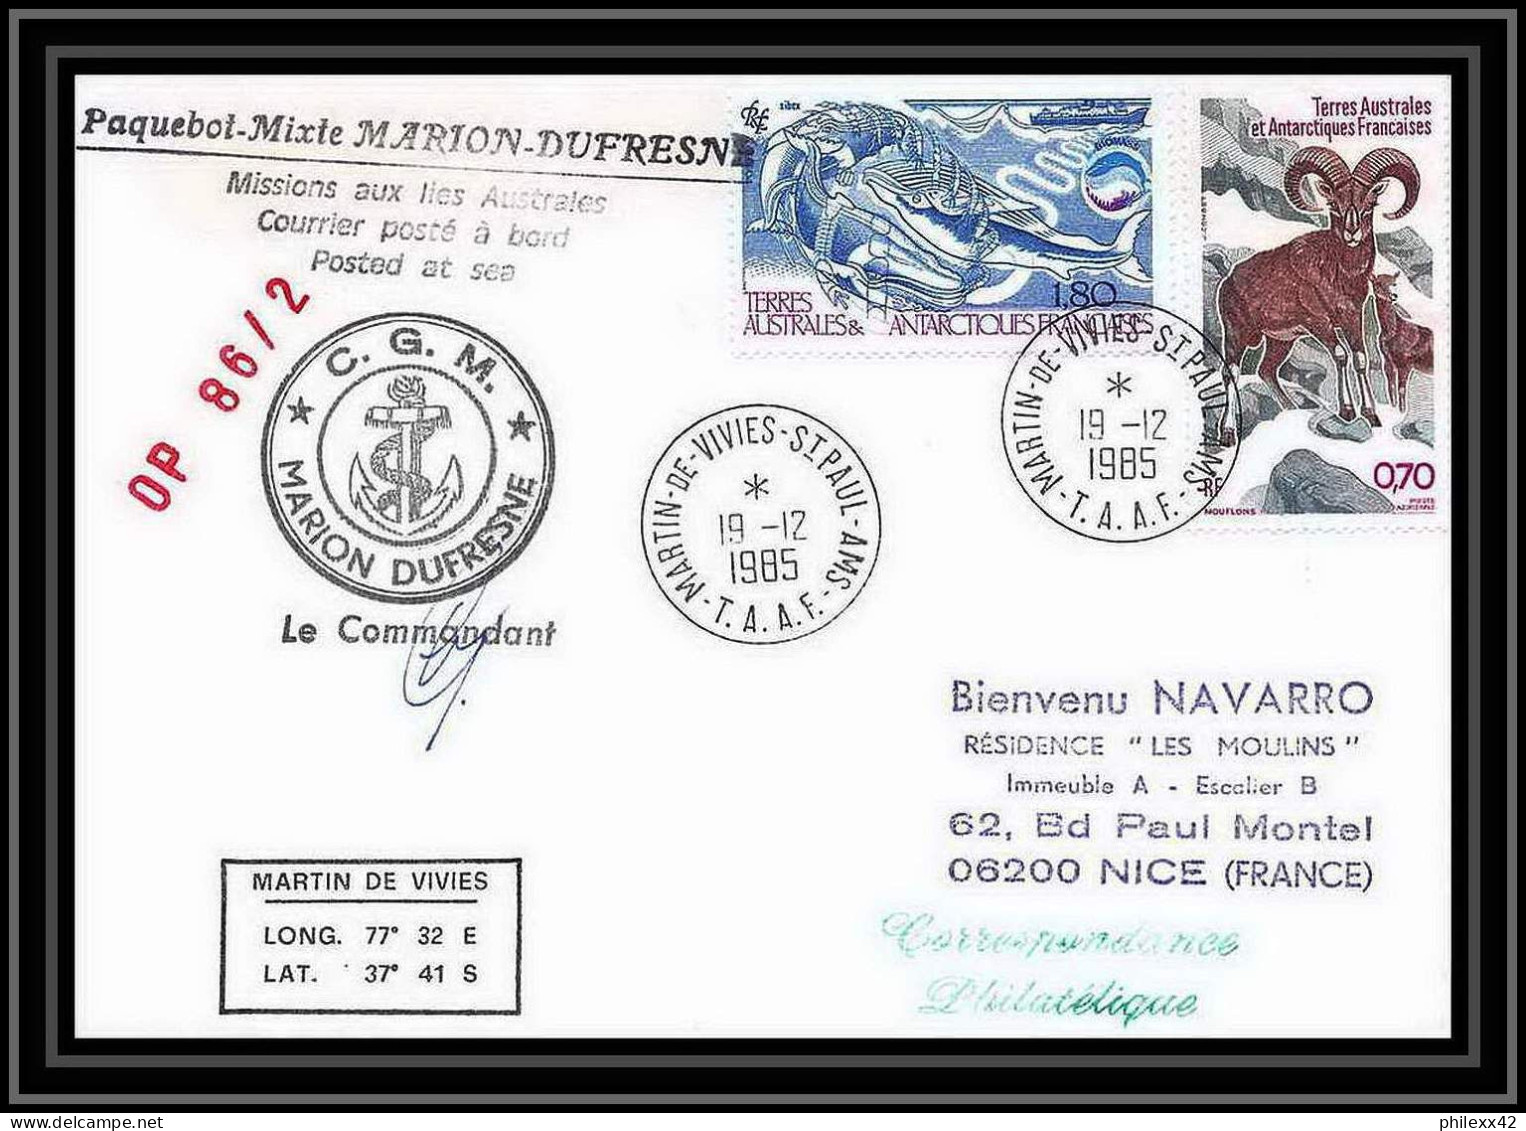 1497 Marion Dufresne Op 86/2 Signé Signed 19/12/1985 TAAF Antarctic Terres Australes Lettre (cover) - Spedizioni Antartiche